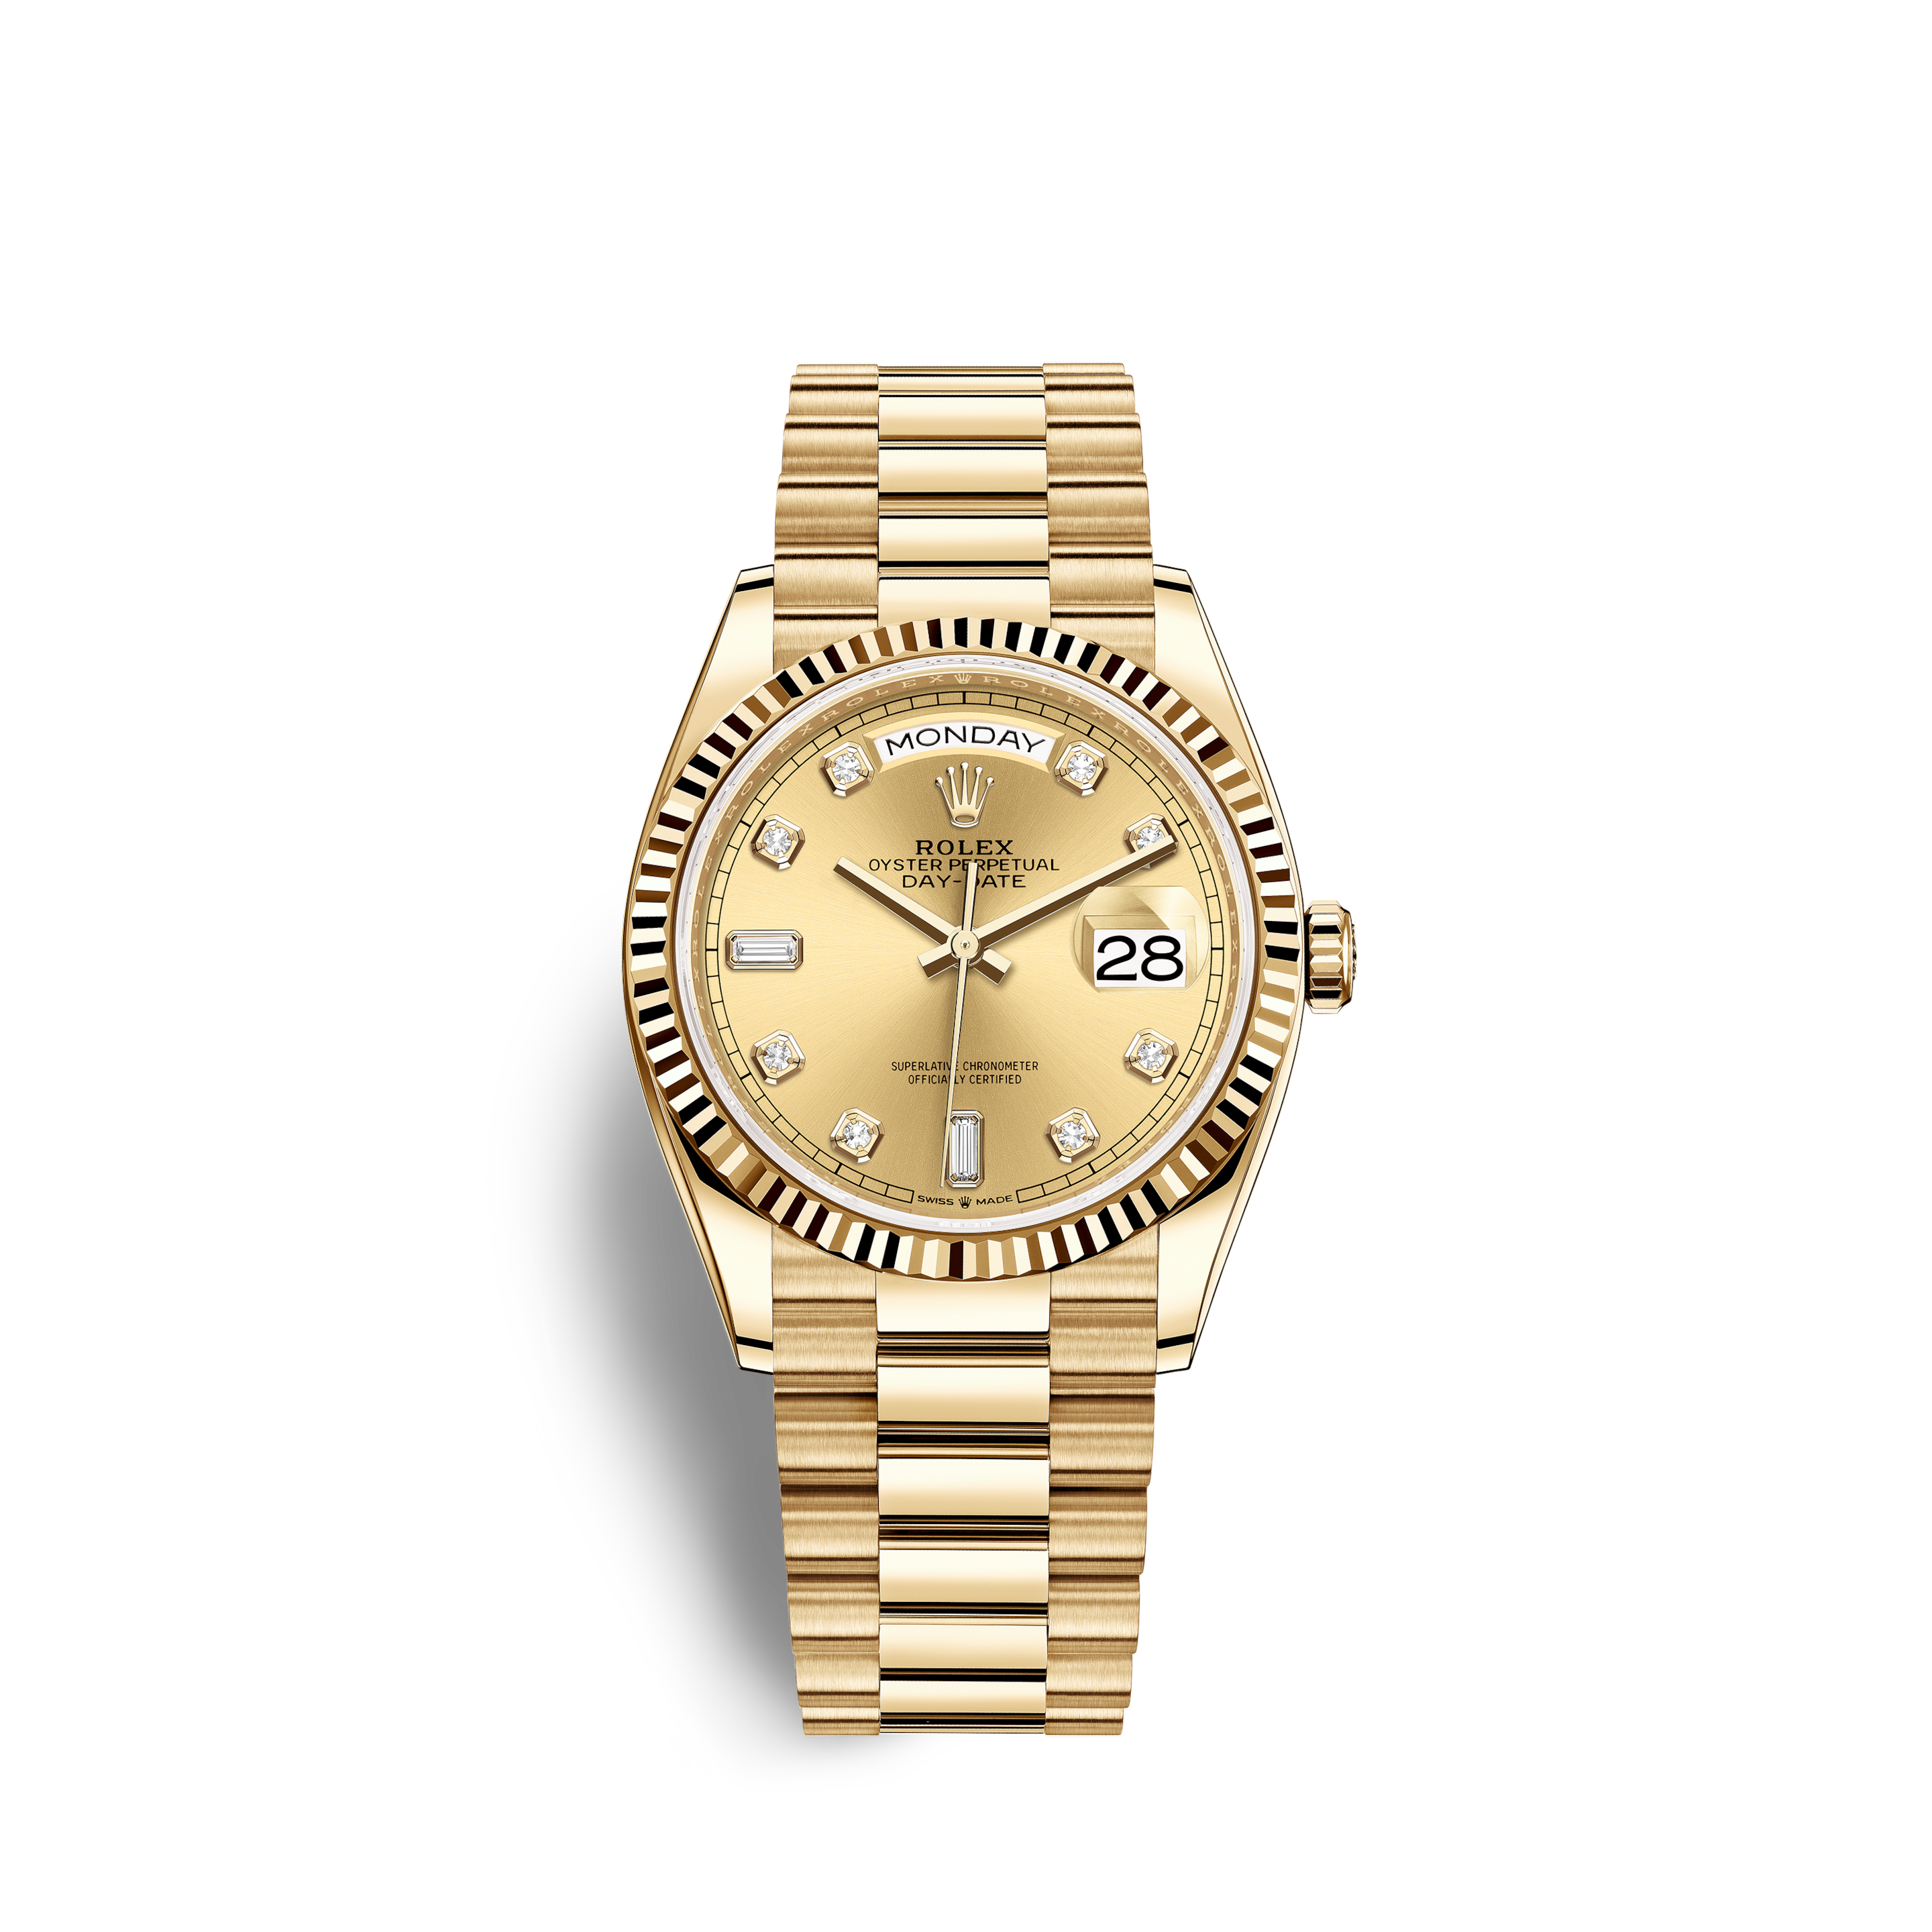 Rolex Day-Date - Find your Rolex